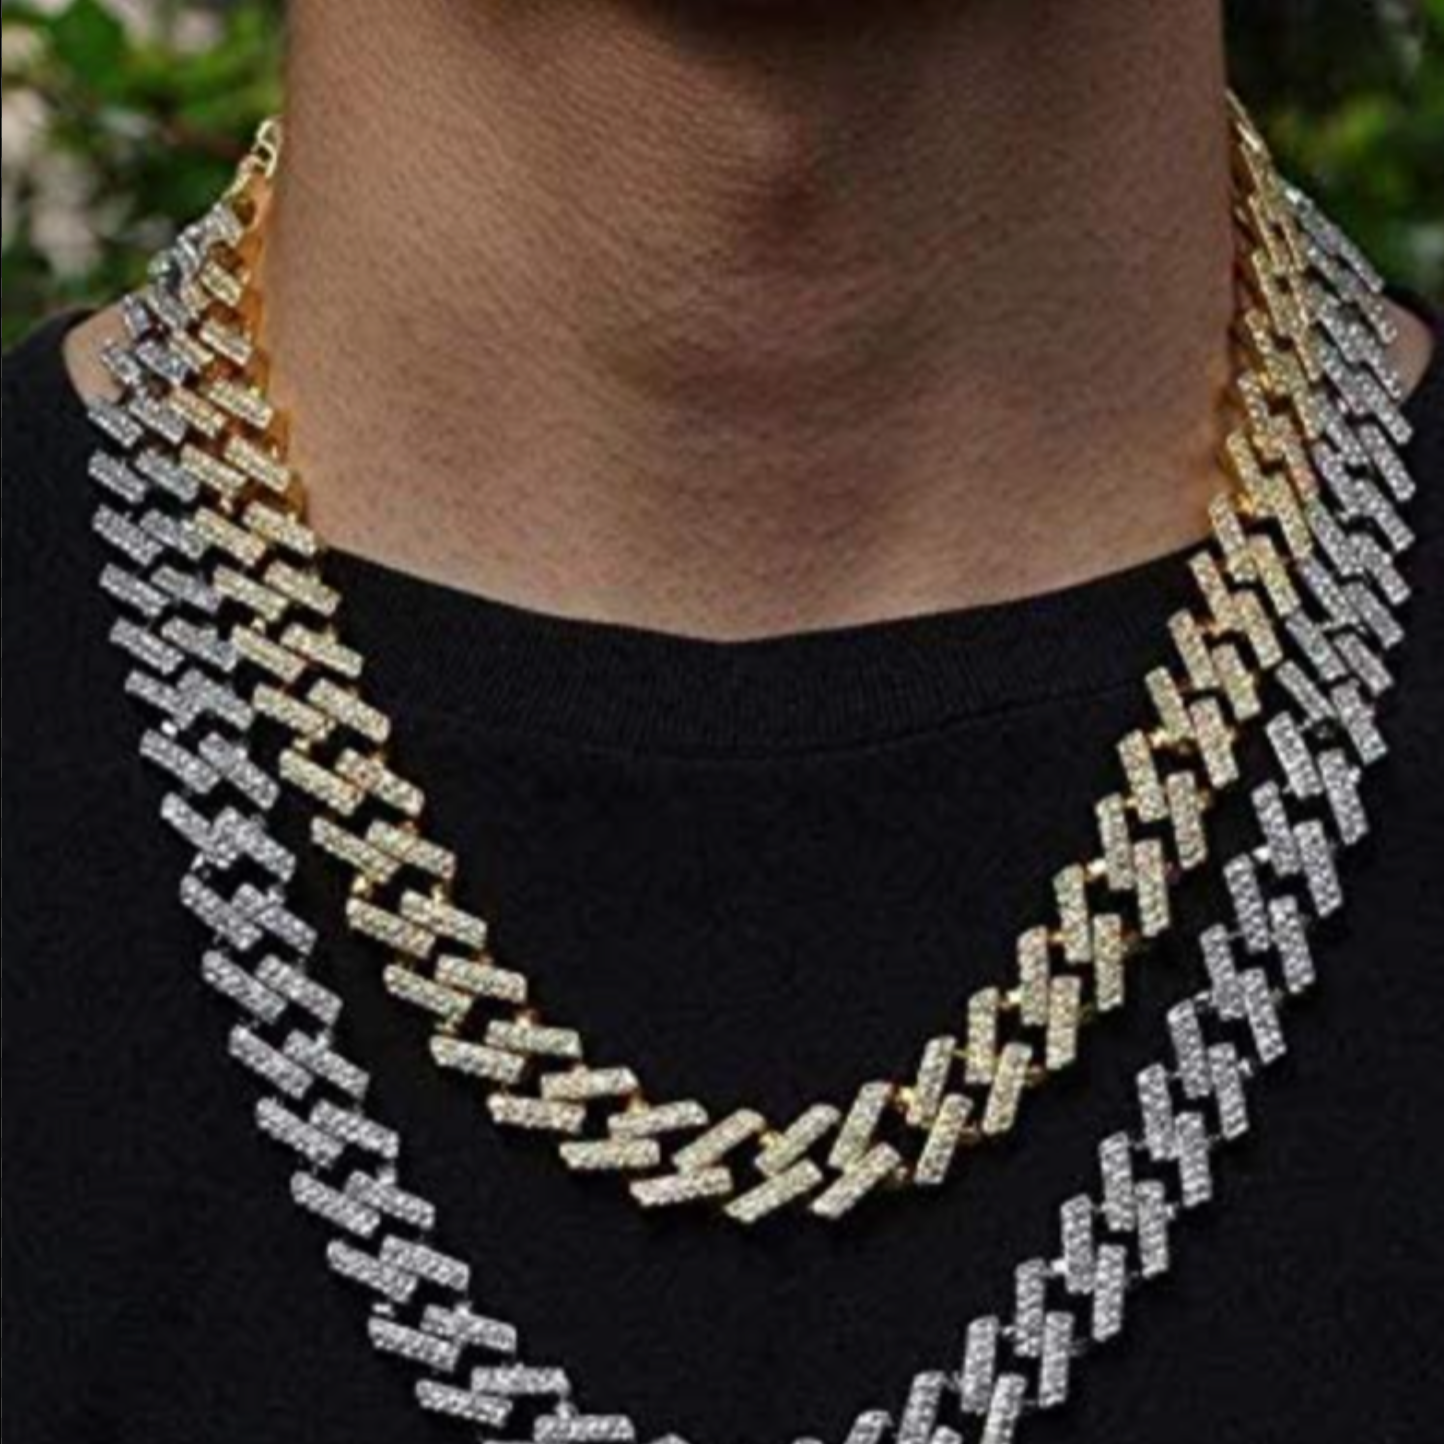 Iced Prong Link Chain